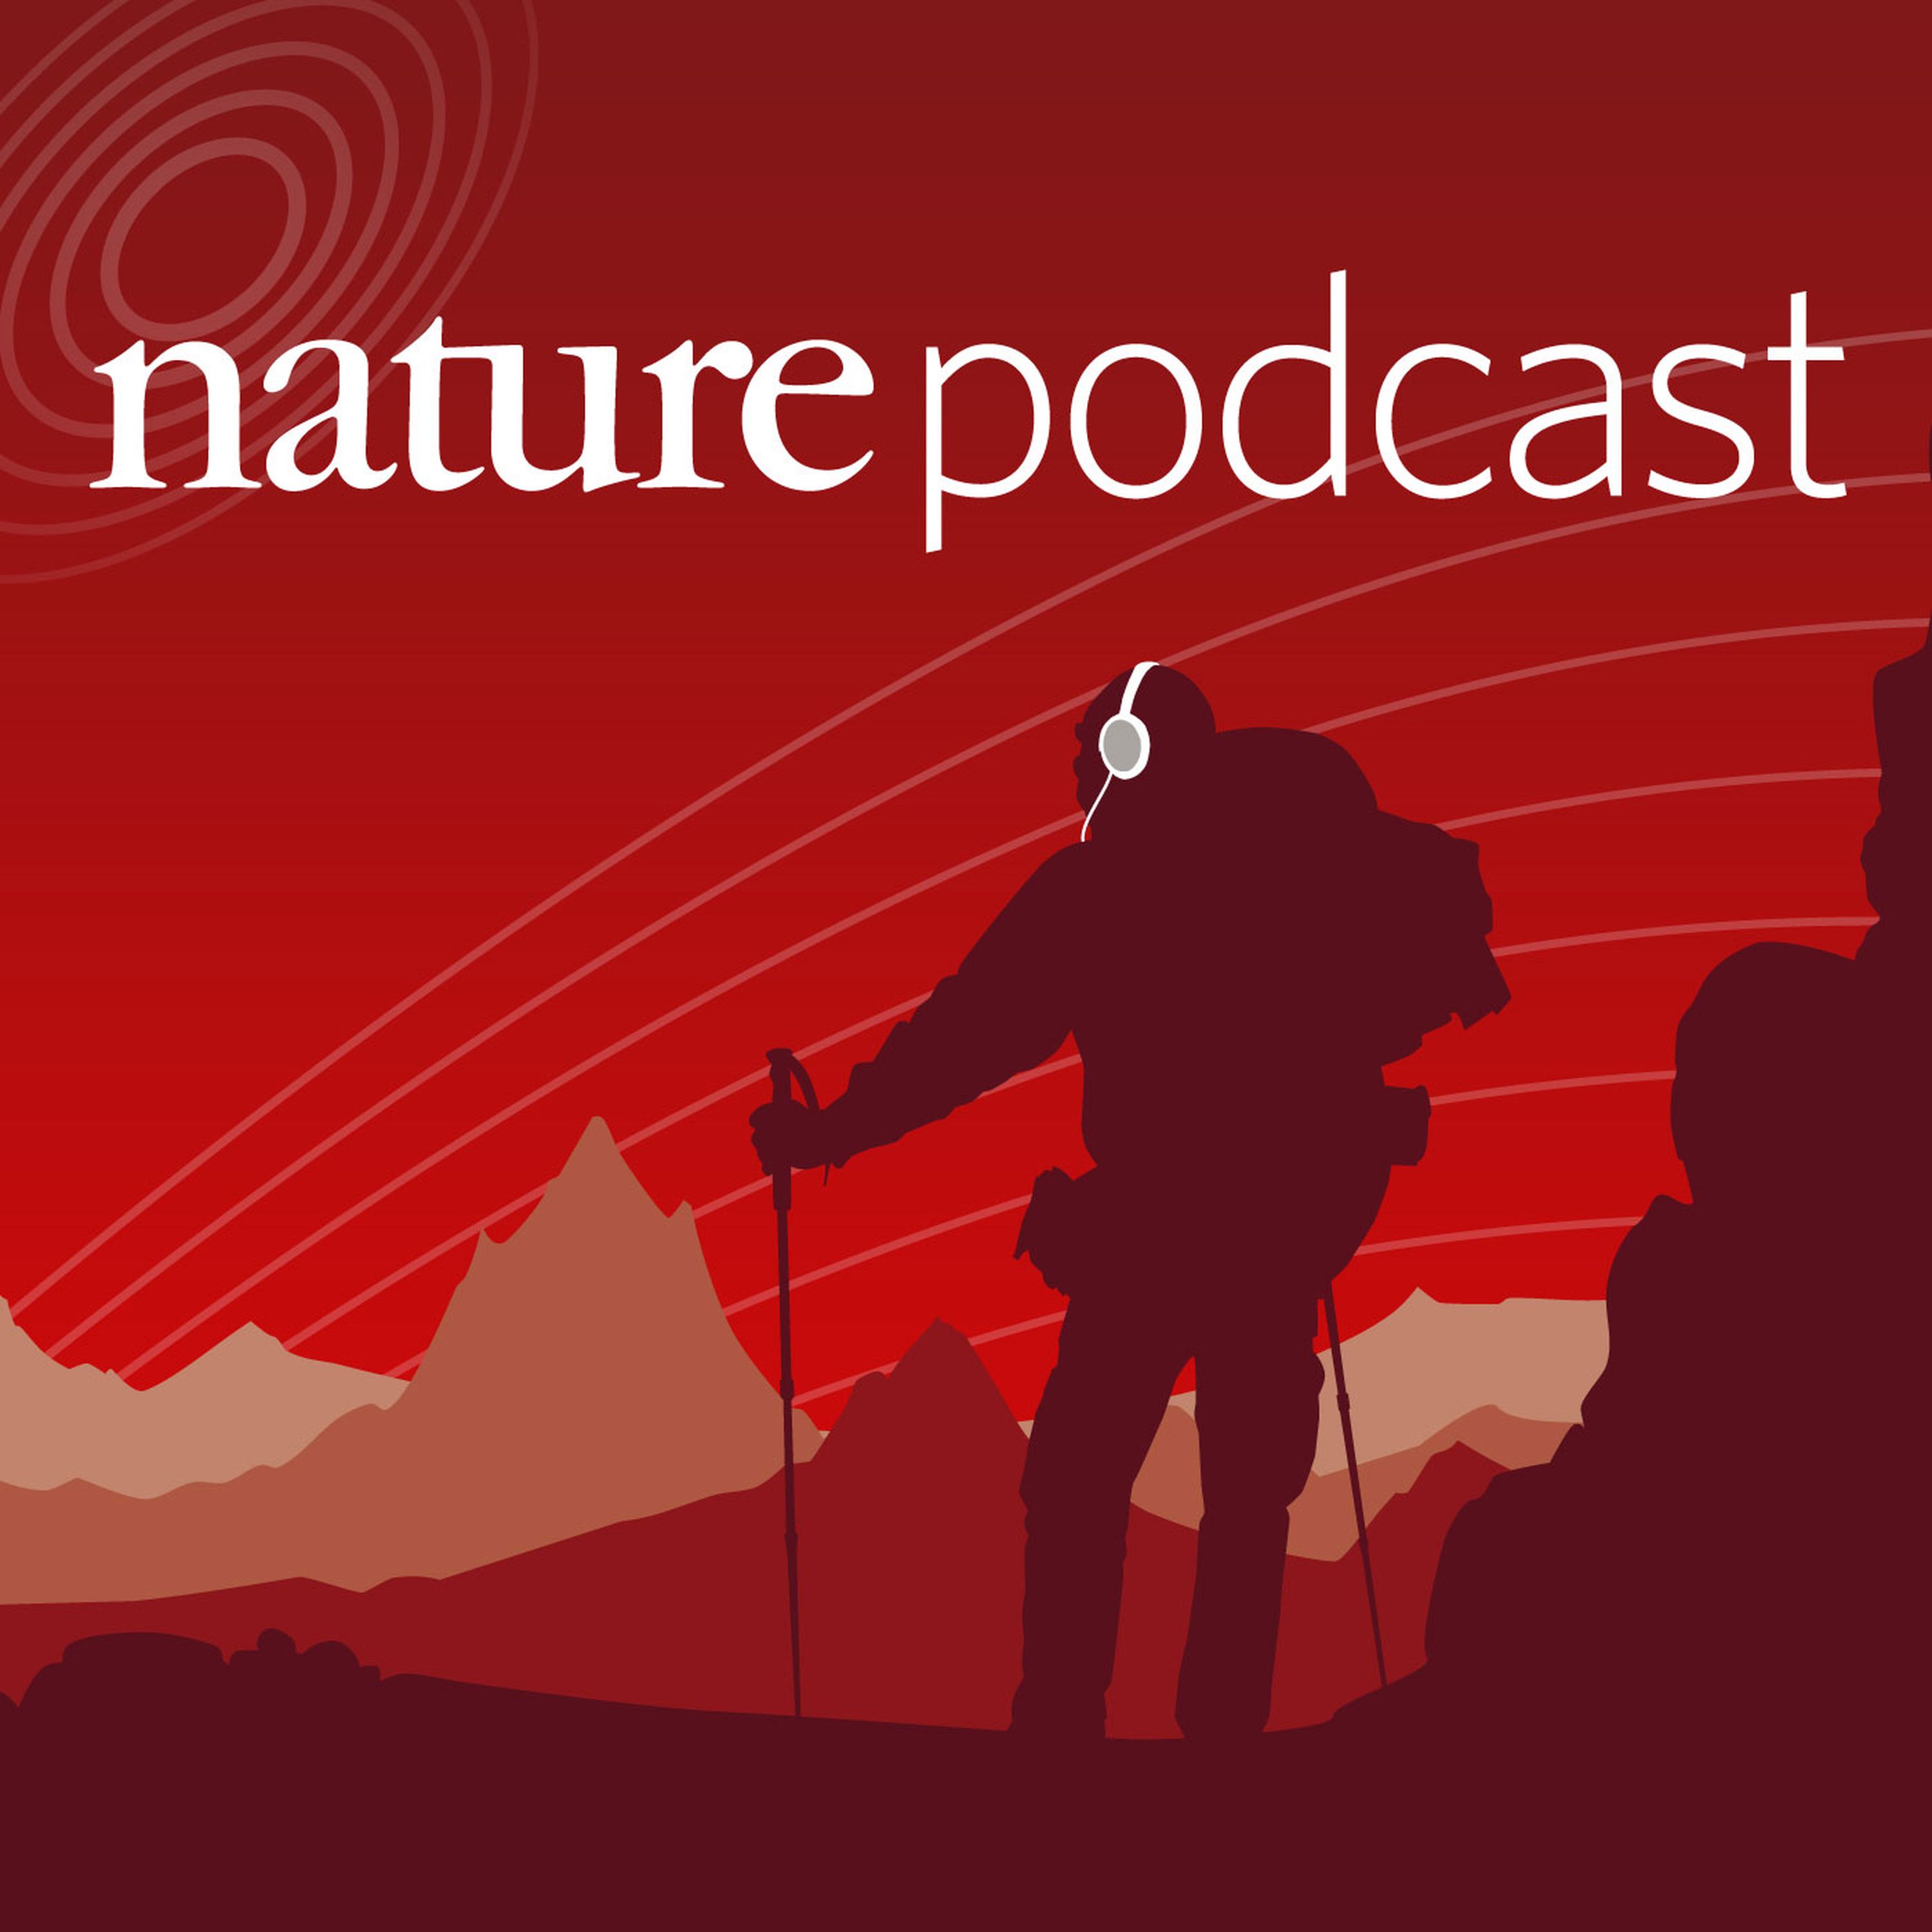 Nature Podcast: 23 July 2015